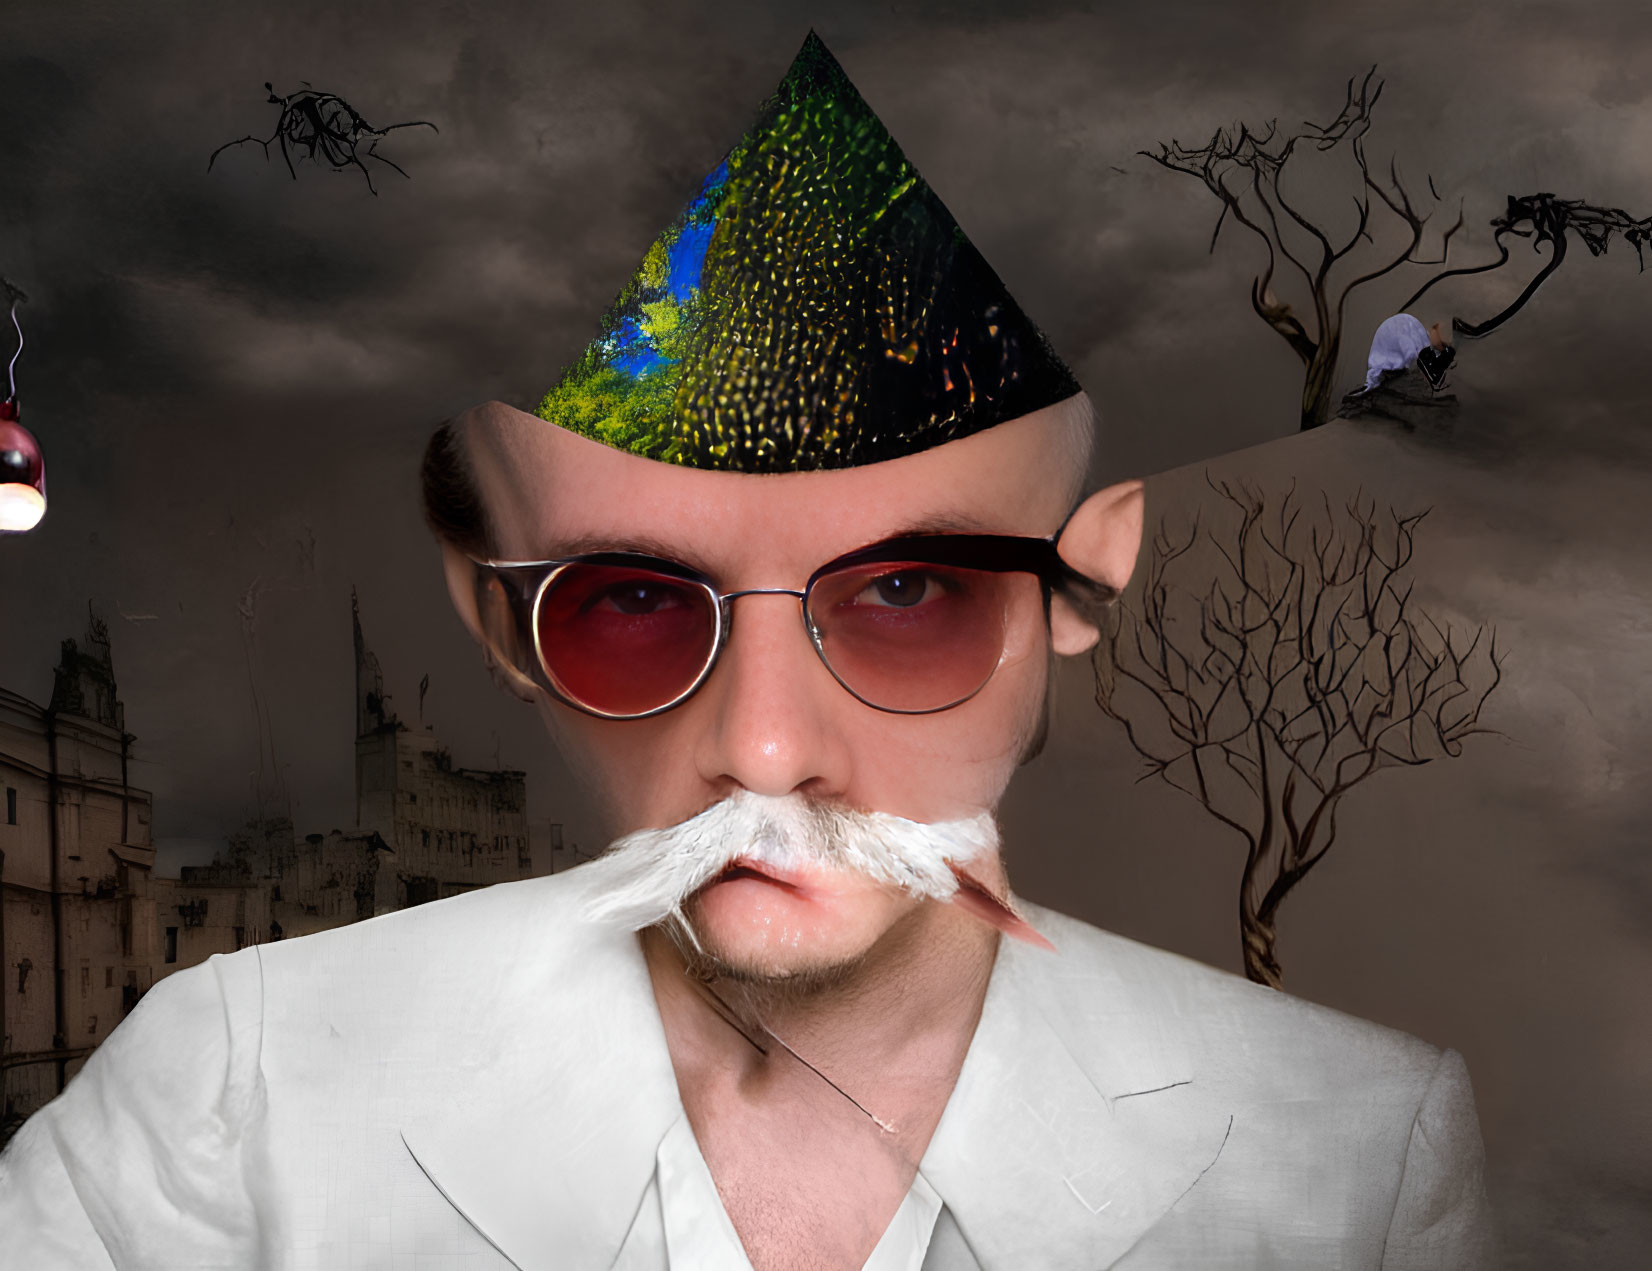 Person with fake mustache, party hat, and sunglasses in surreal setting with trees and spiders